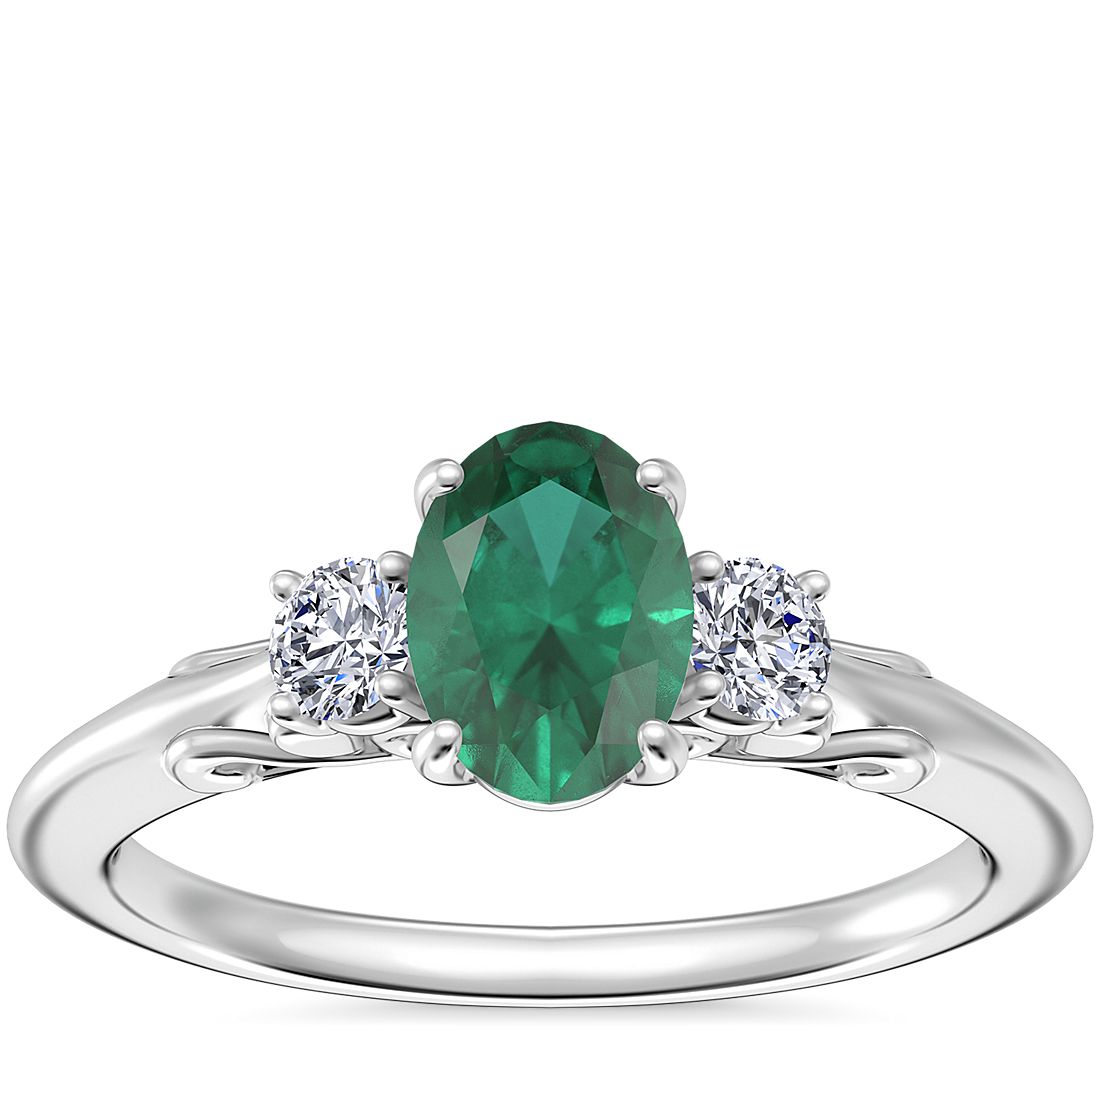 Vintage Three Stone Engagement Ring with Oval Emerald in Platinum (7x5mm)